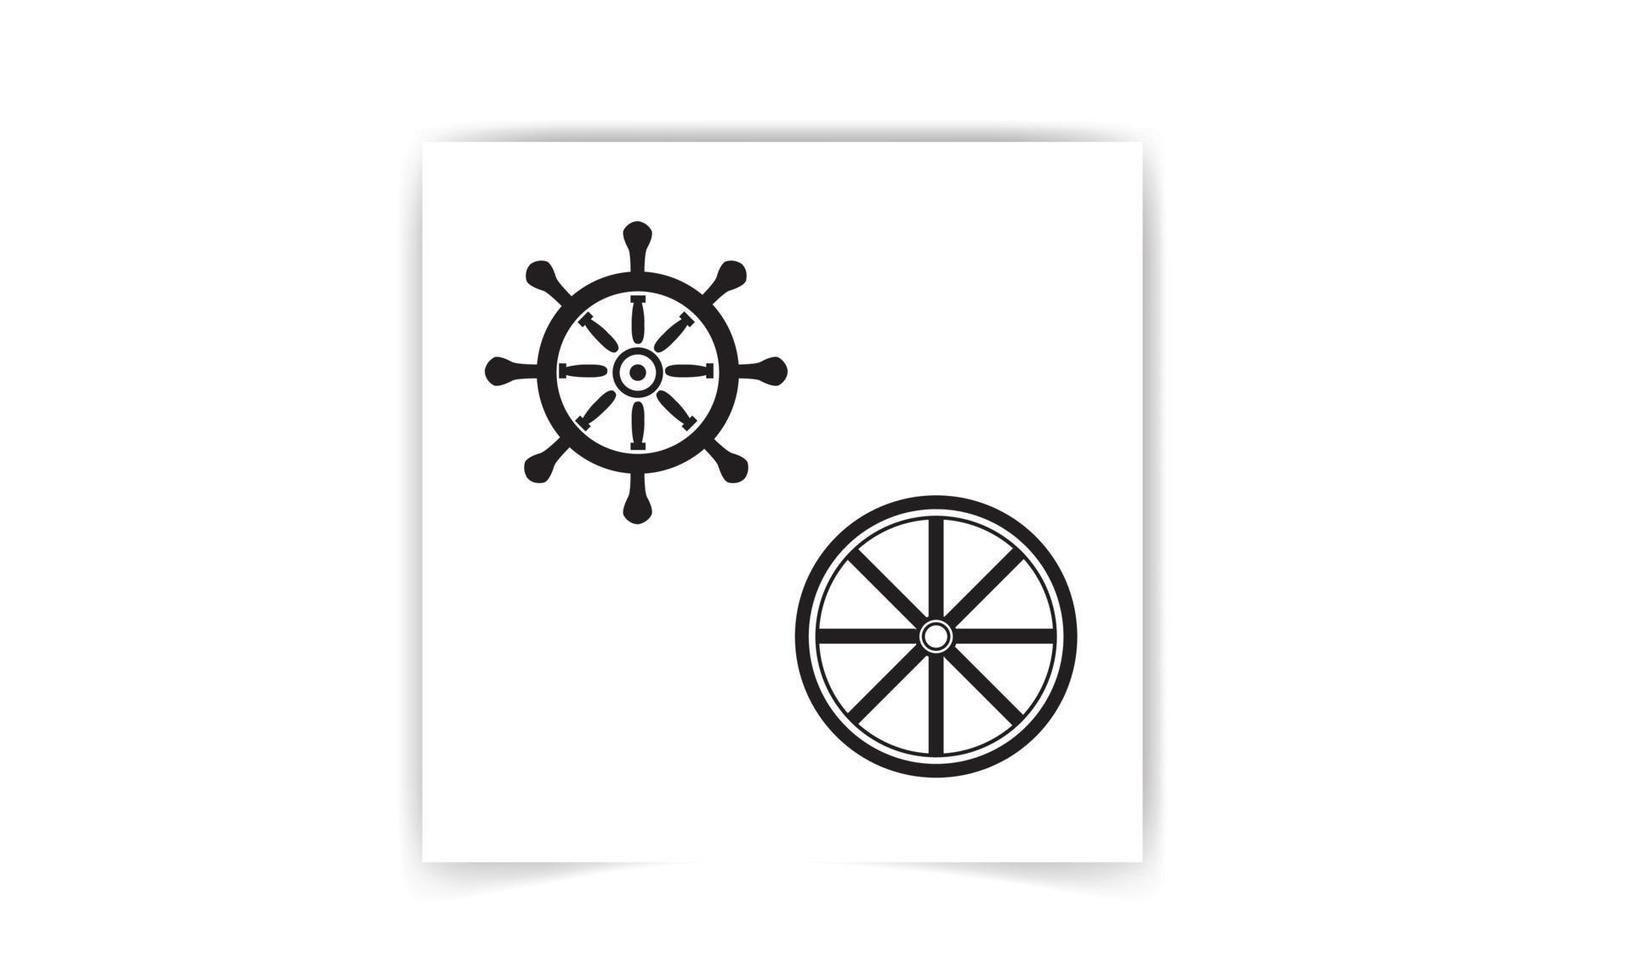 silhouette of a bicycle wheel, Ship wheel on white background. Nautical icon design. vector